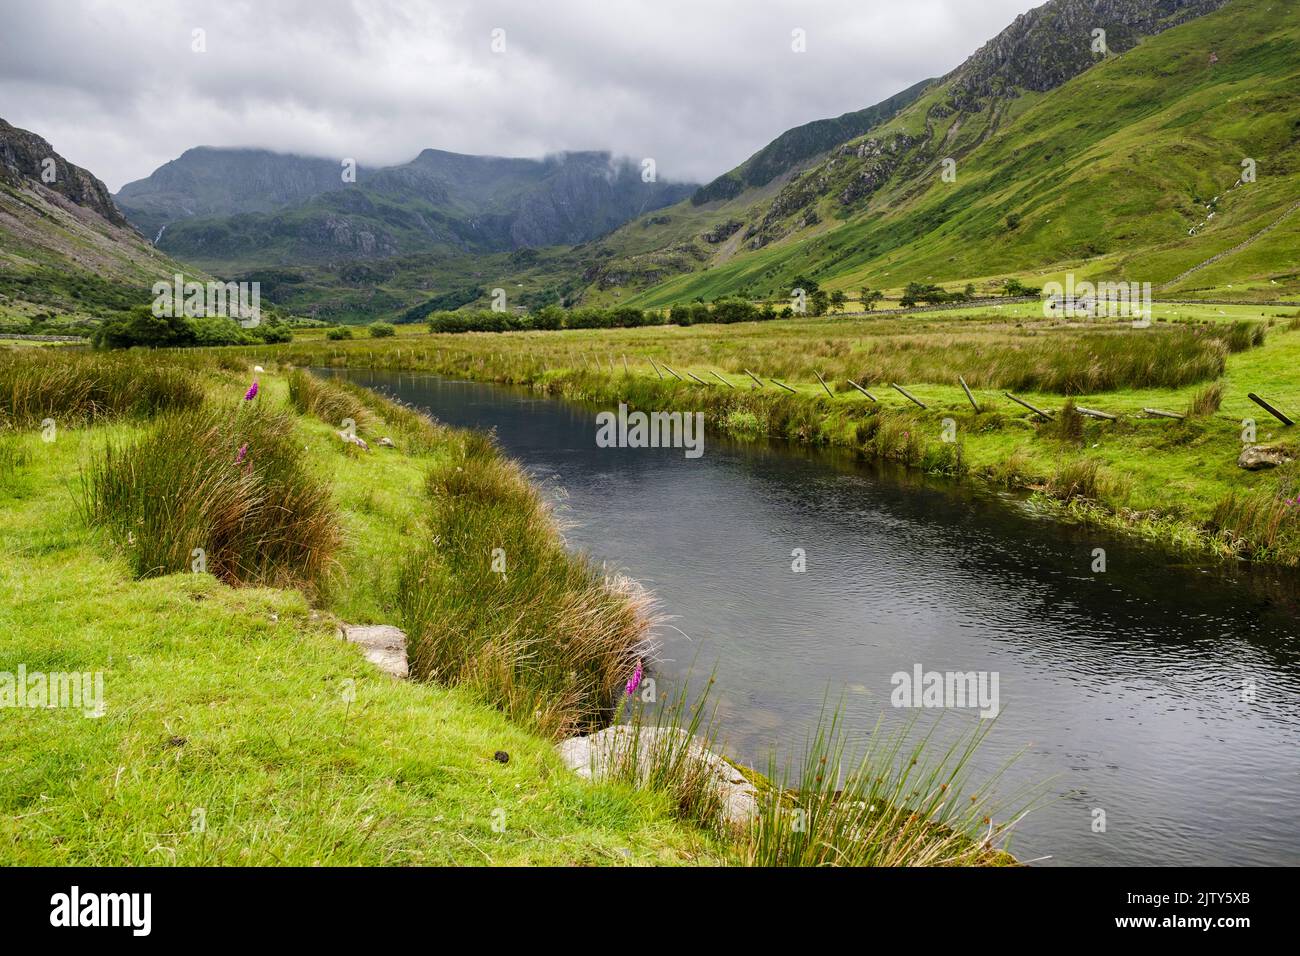 View to Glyderau mountains in low cloud along Afon Ogwen River in Nant Ffrancon valley in Snowdonia National Park. Bethesda, Gwynedd, North Wales, UK Stock Photo